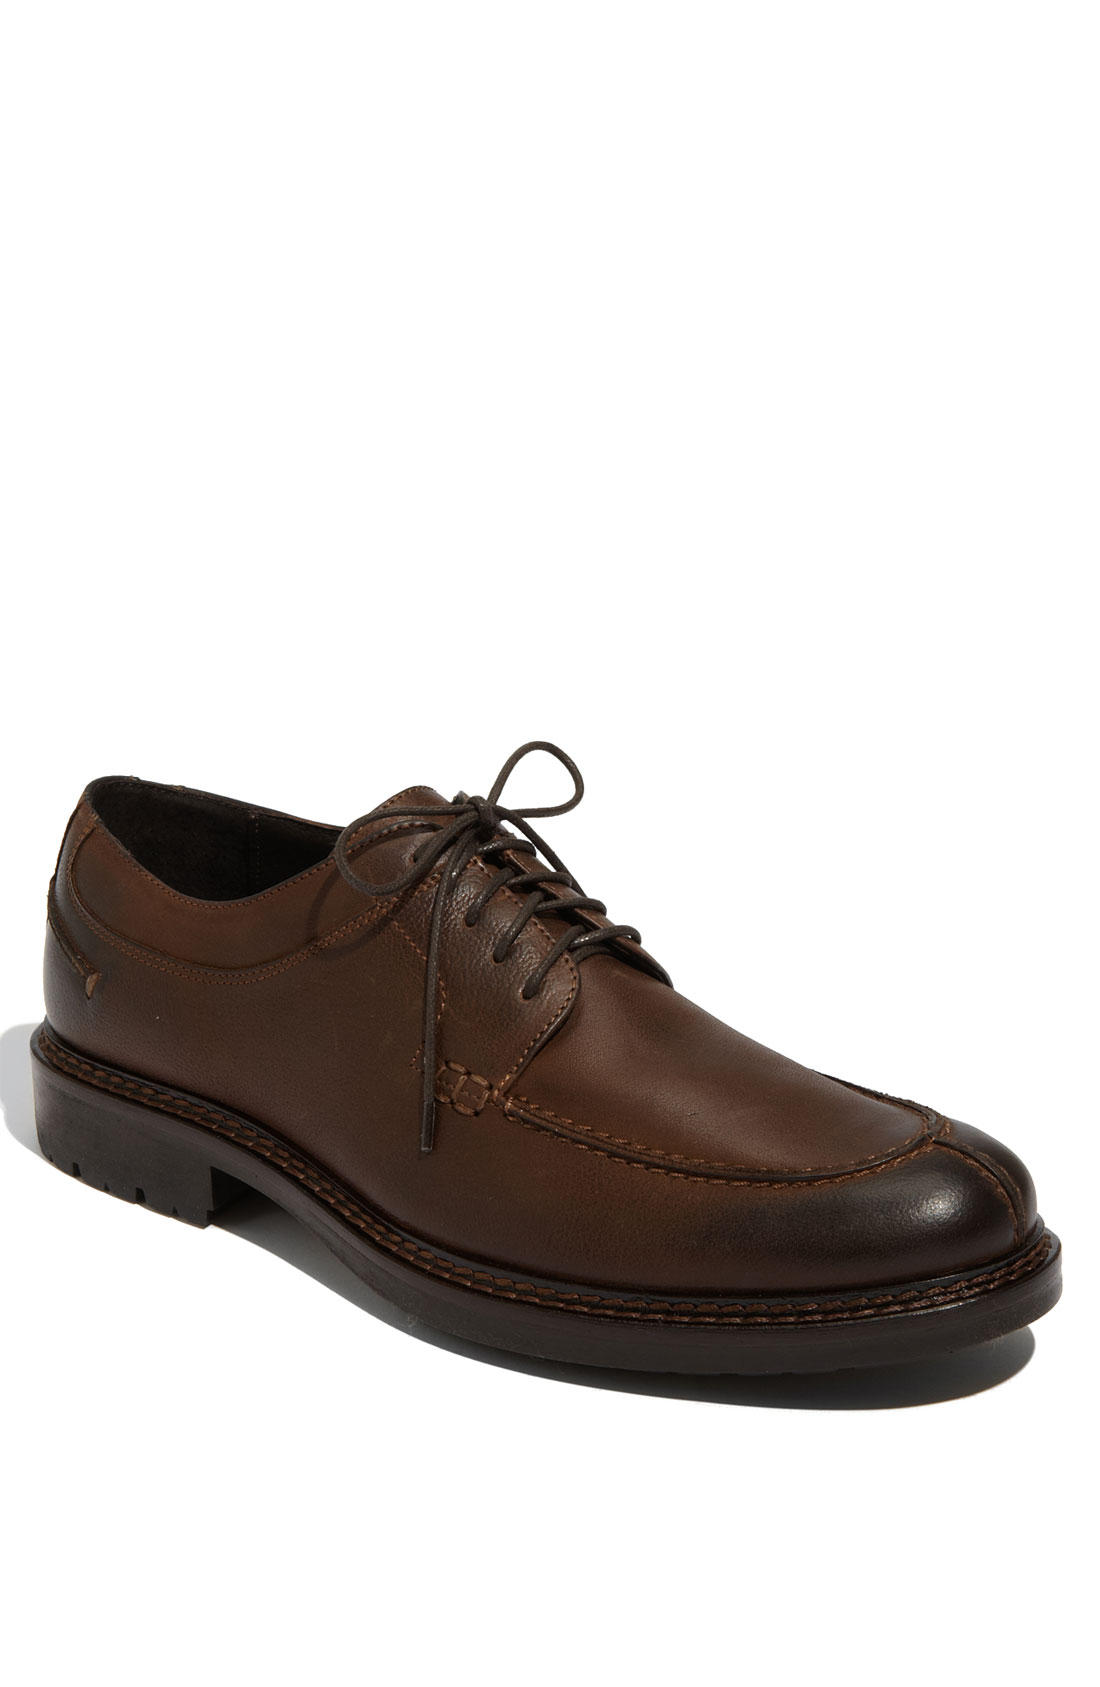 Johnston  Murphy Watts Lace-up Oxford in Brown for Men (brown ...